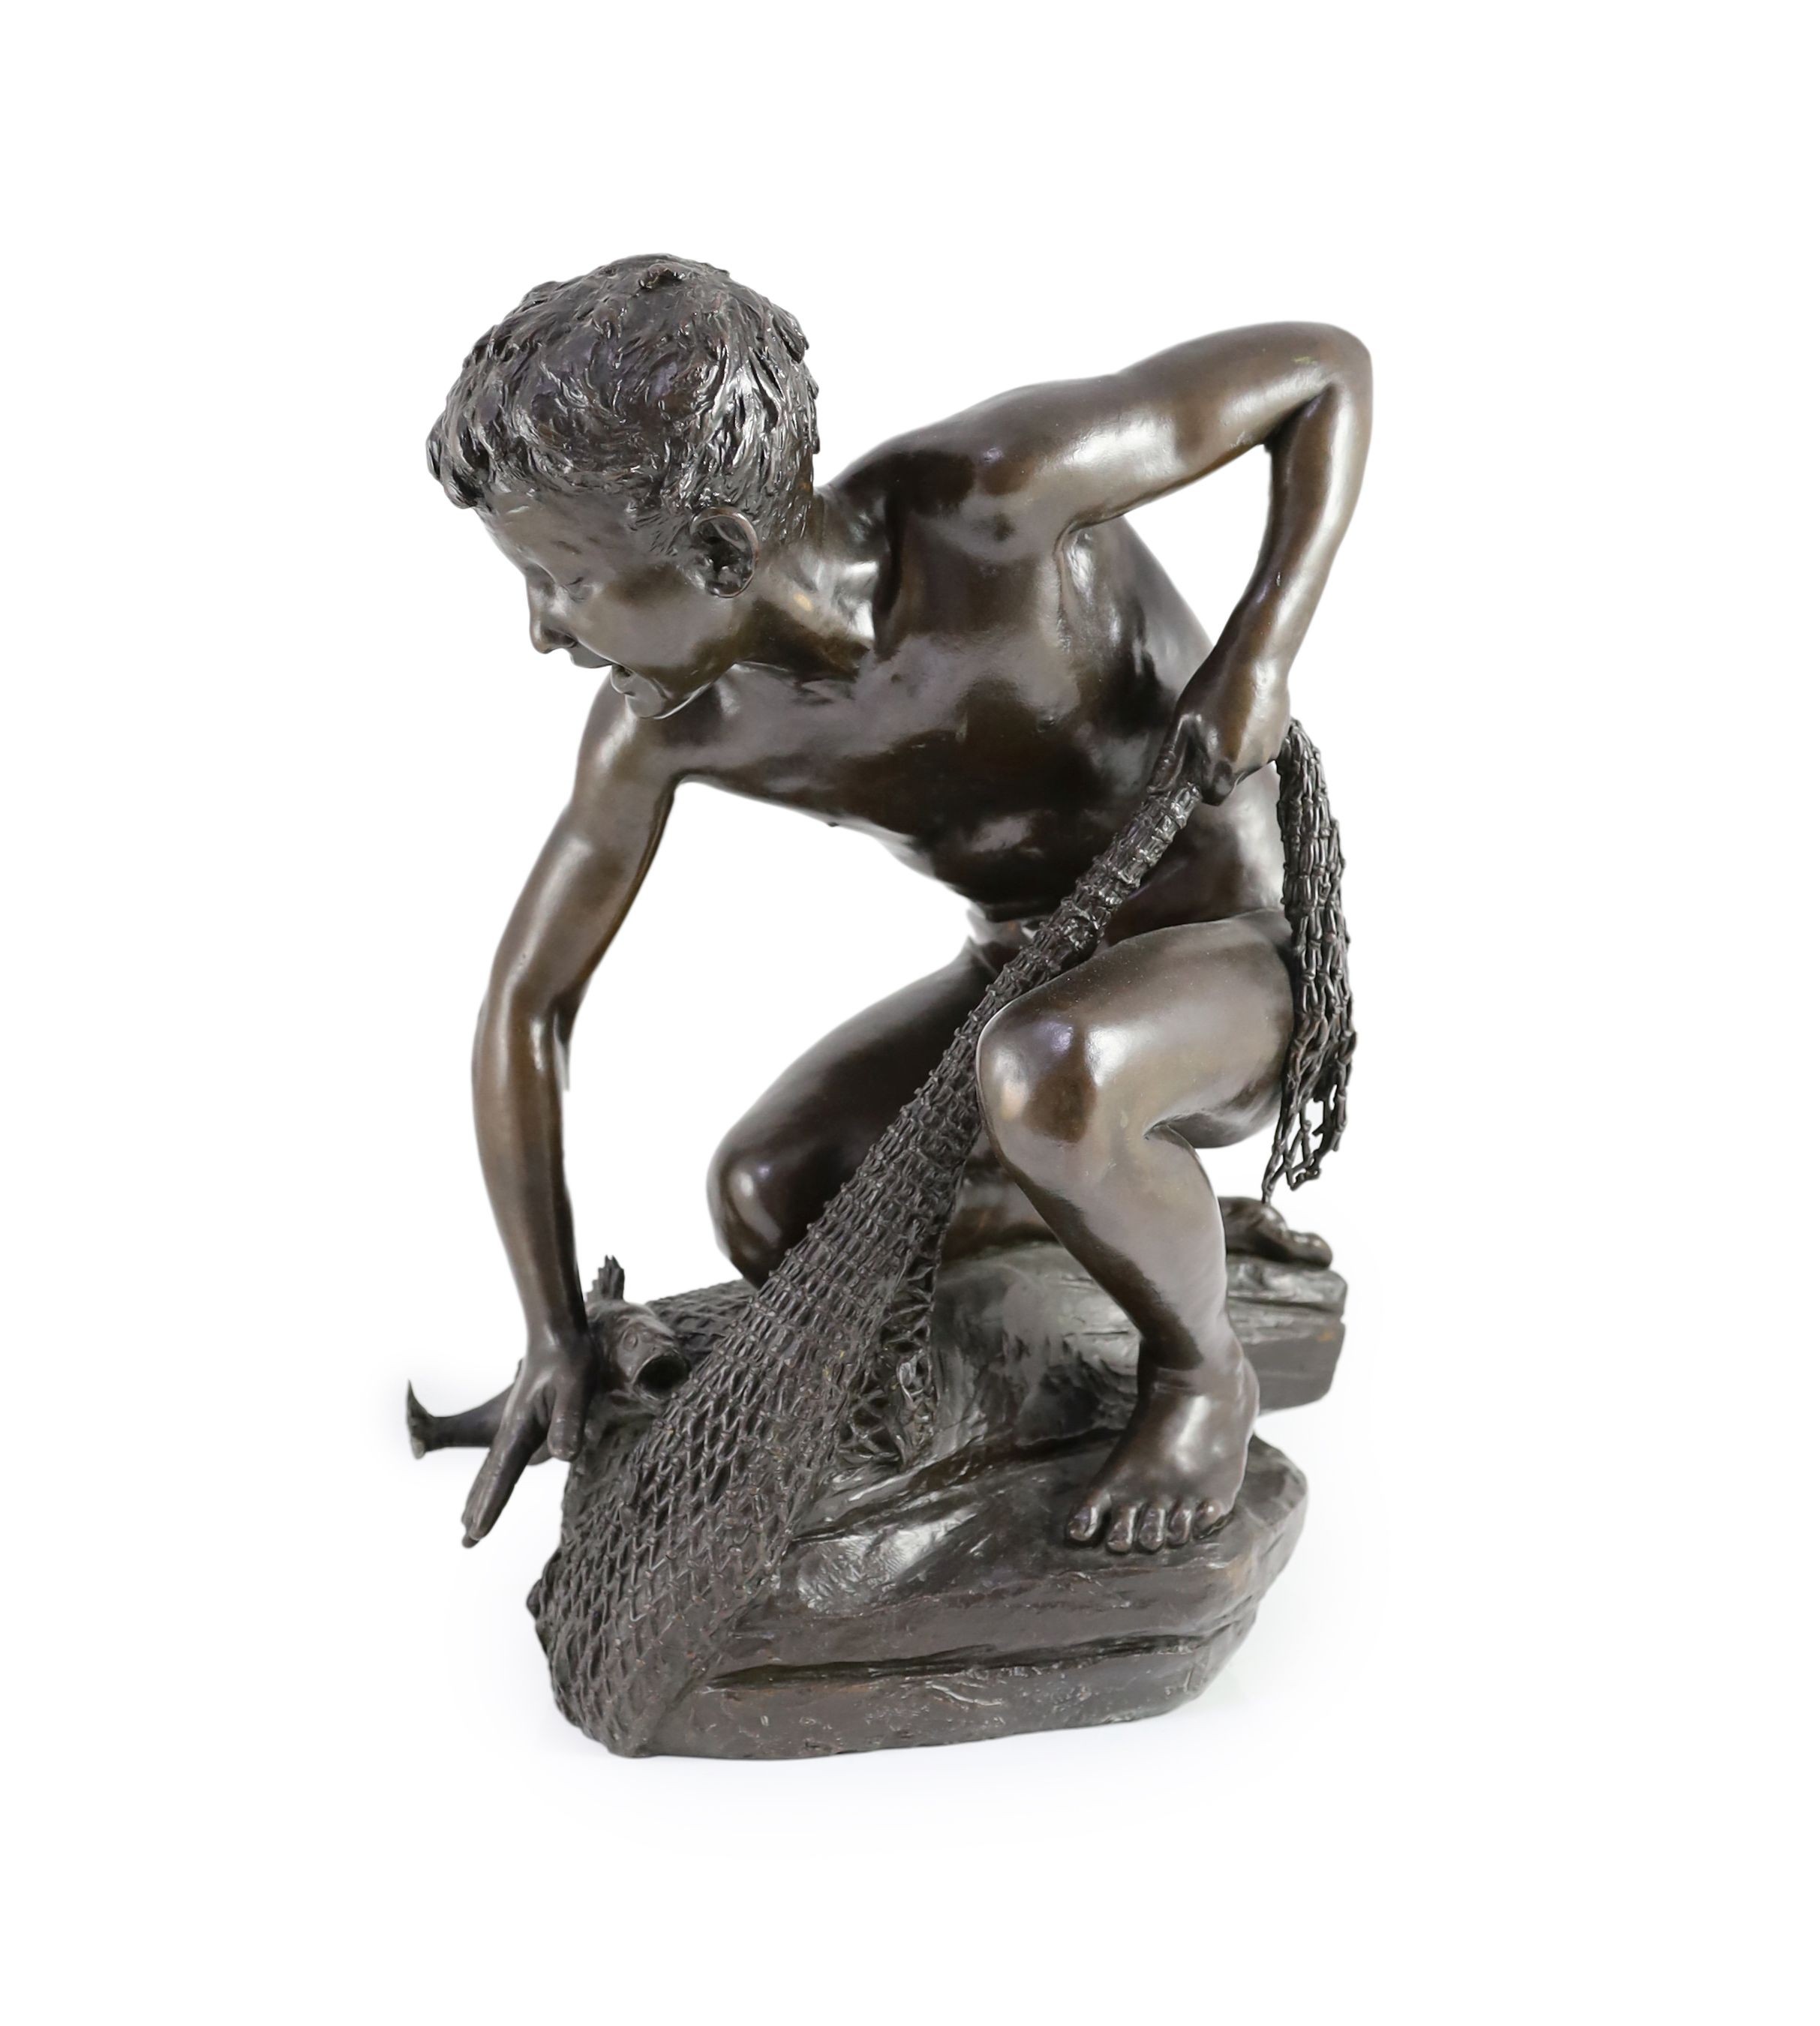 H. Gladenbeck and Son. A bronze figure of a boy catching a fish, height 45cm